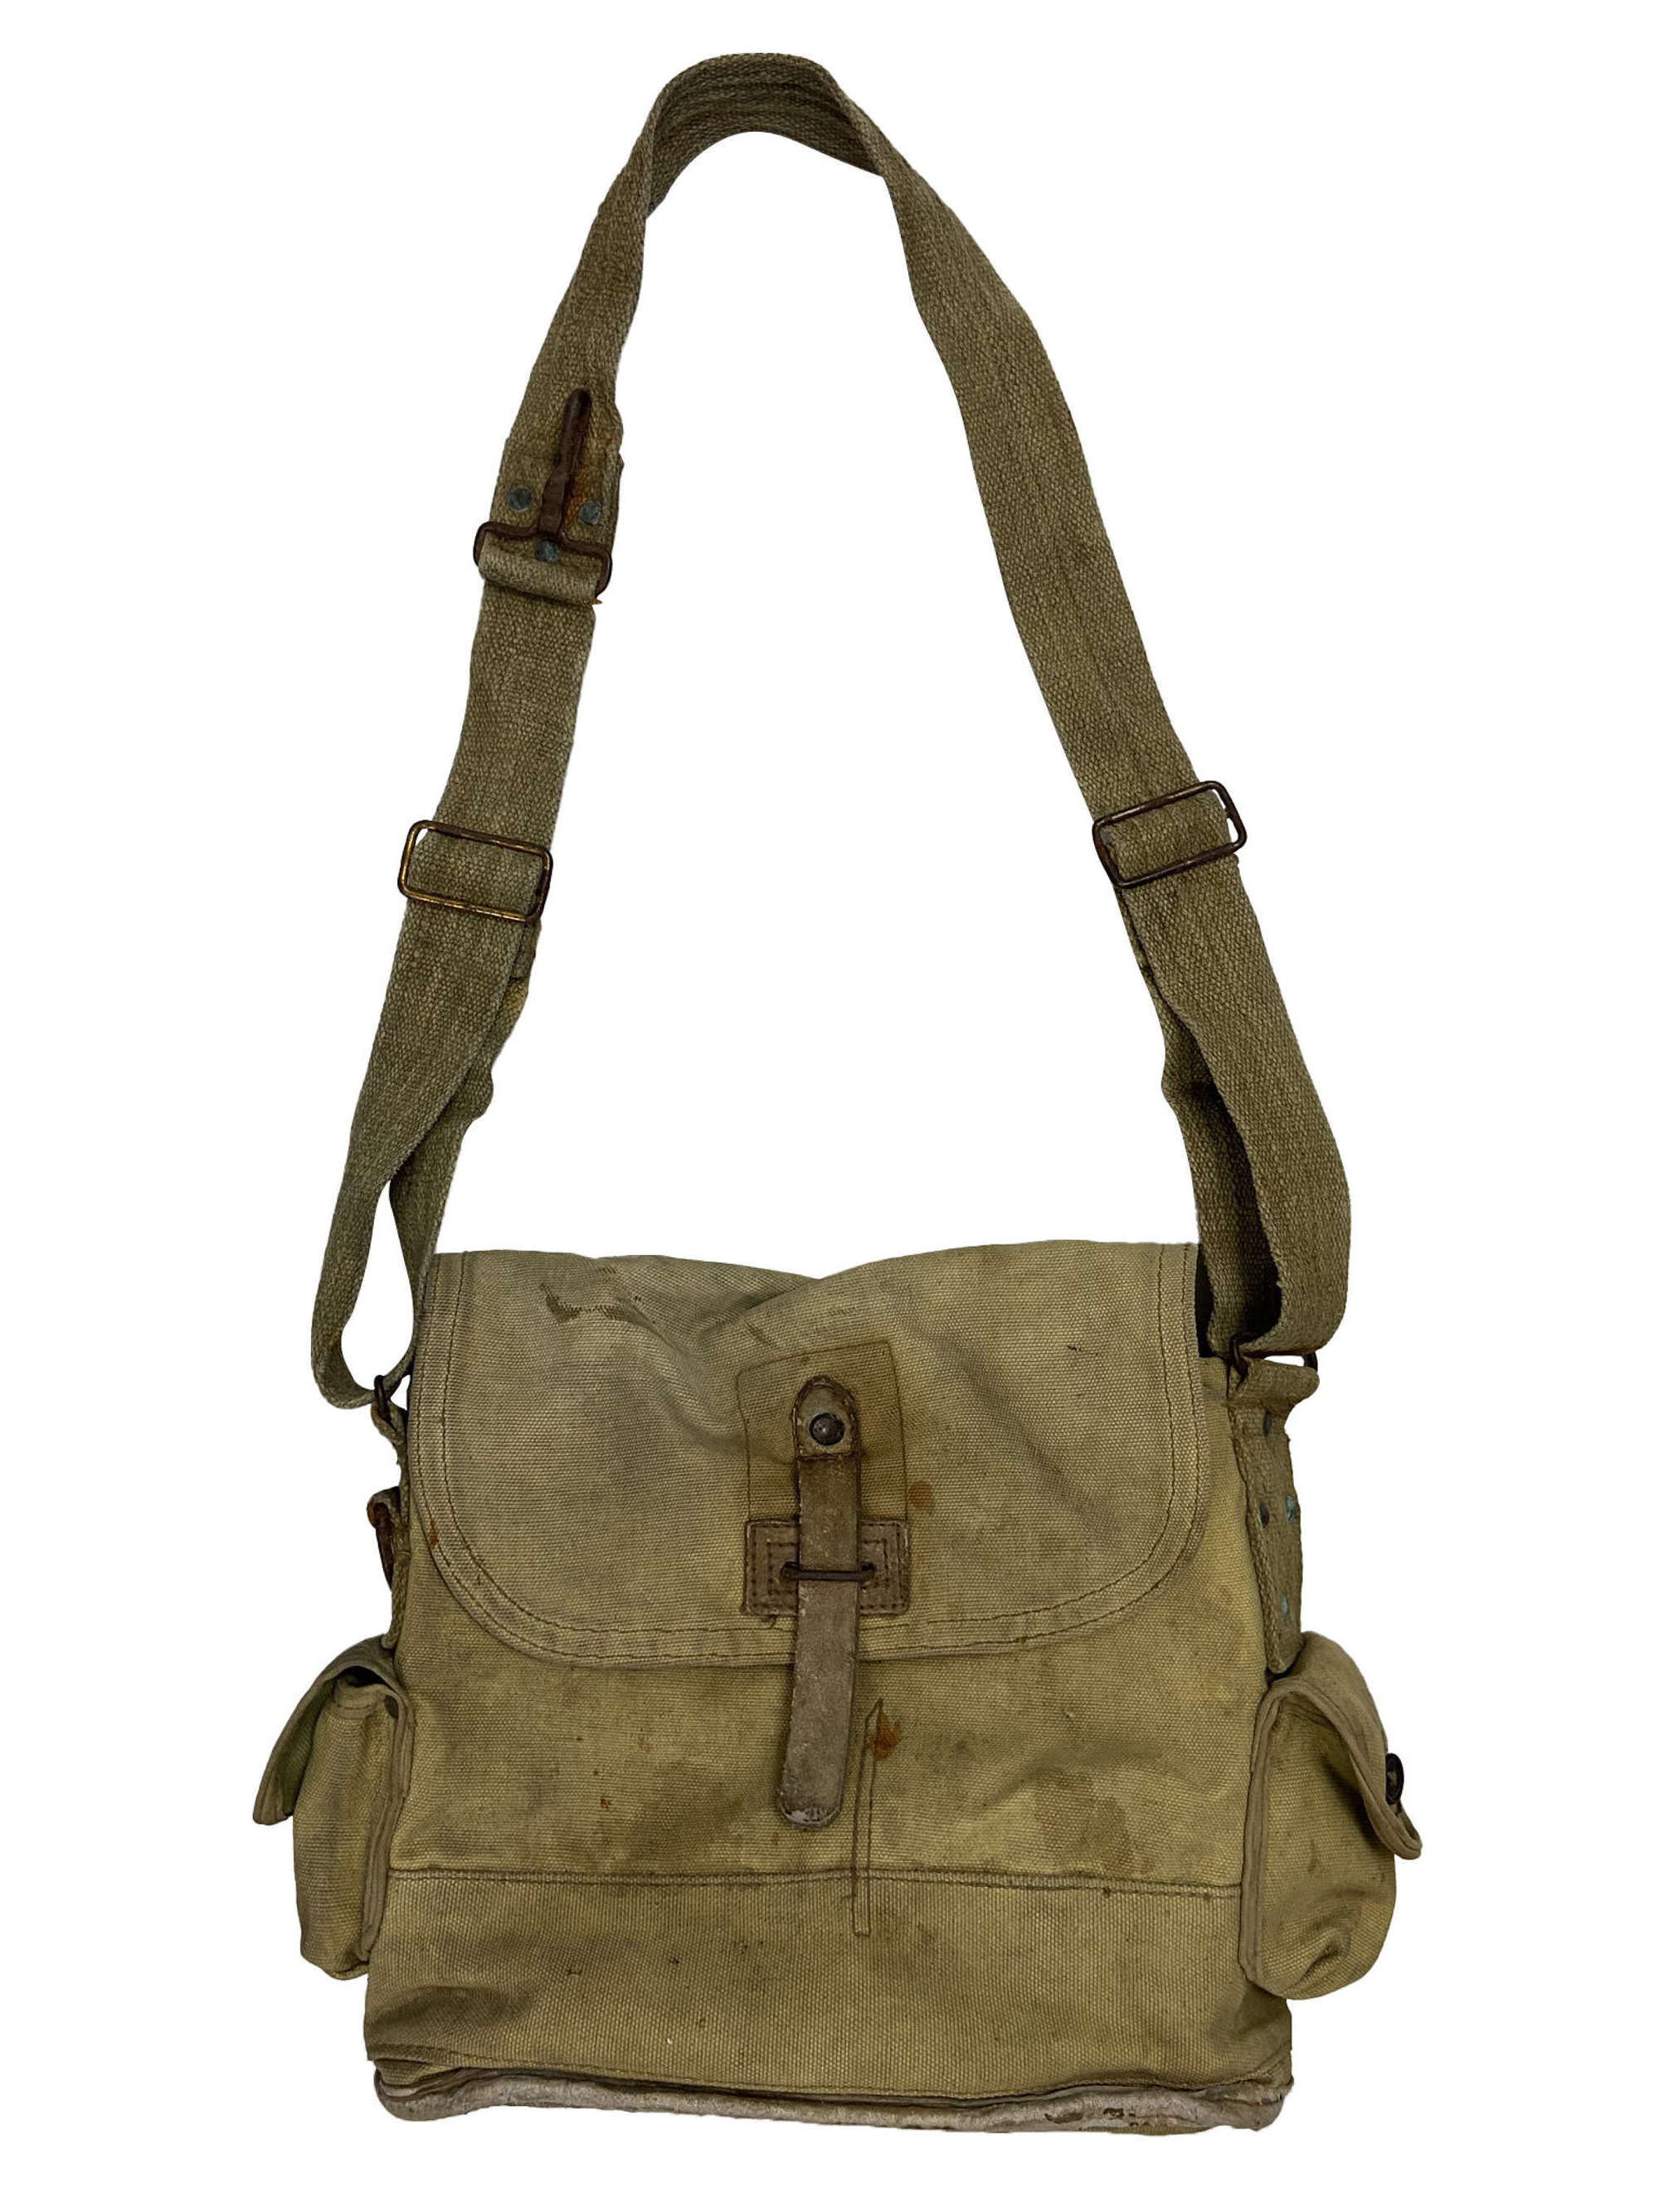 Original 1940 Dated French Army Gas Mask Bag